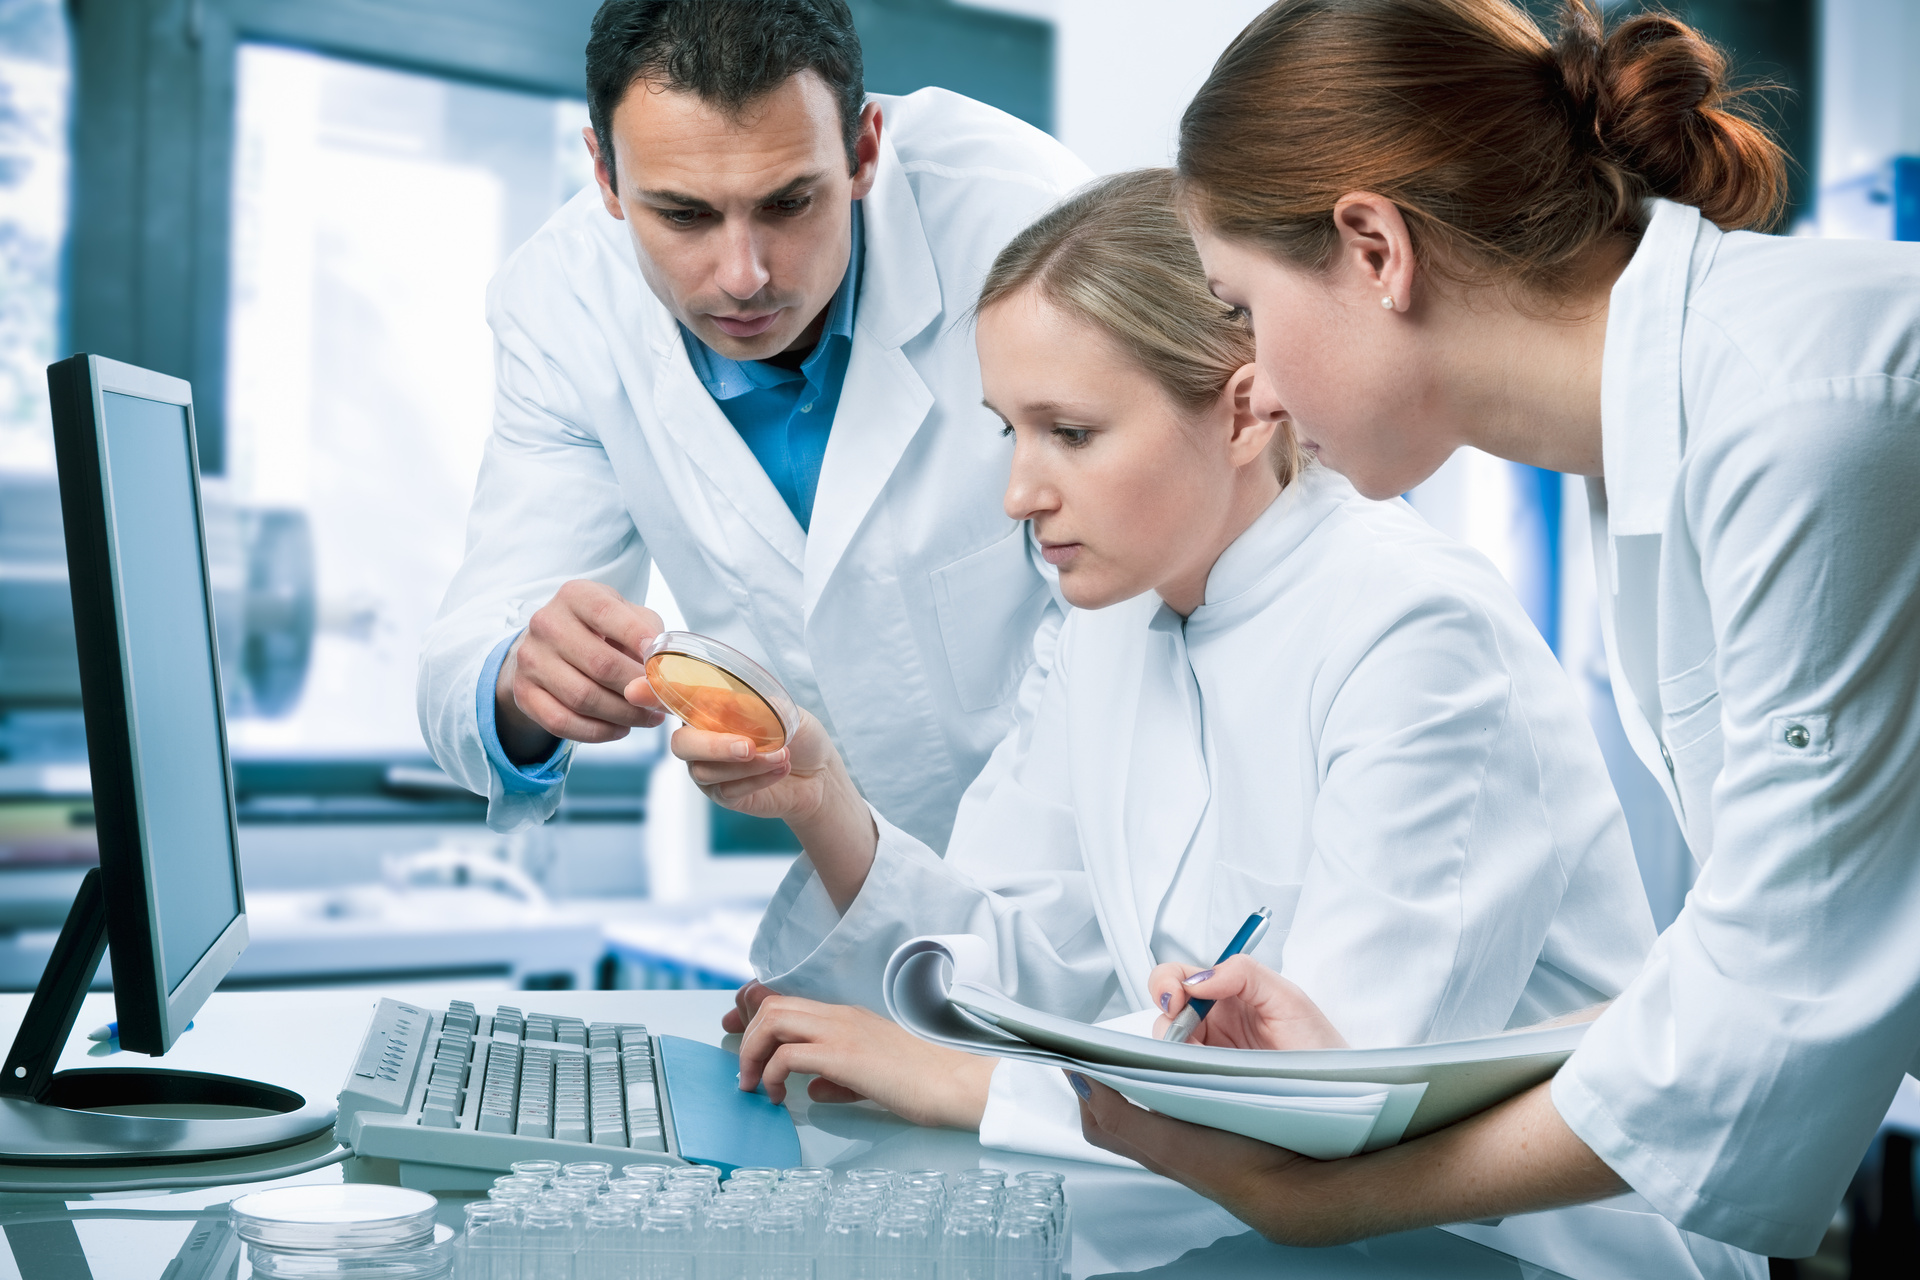 Three medical researchers looking at specimen